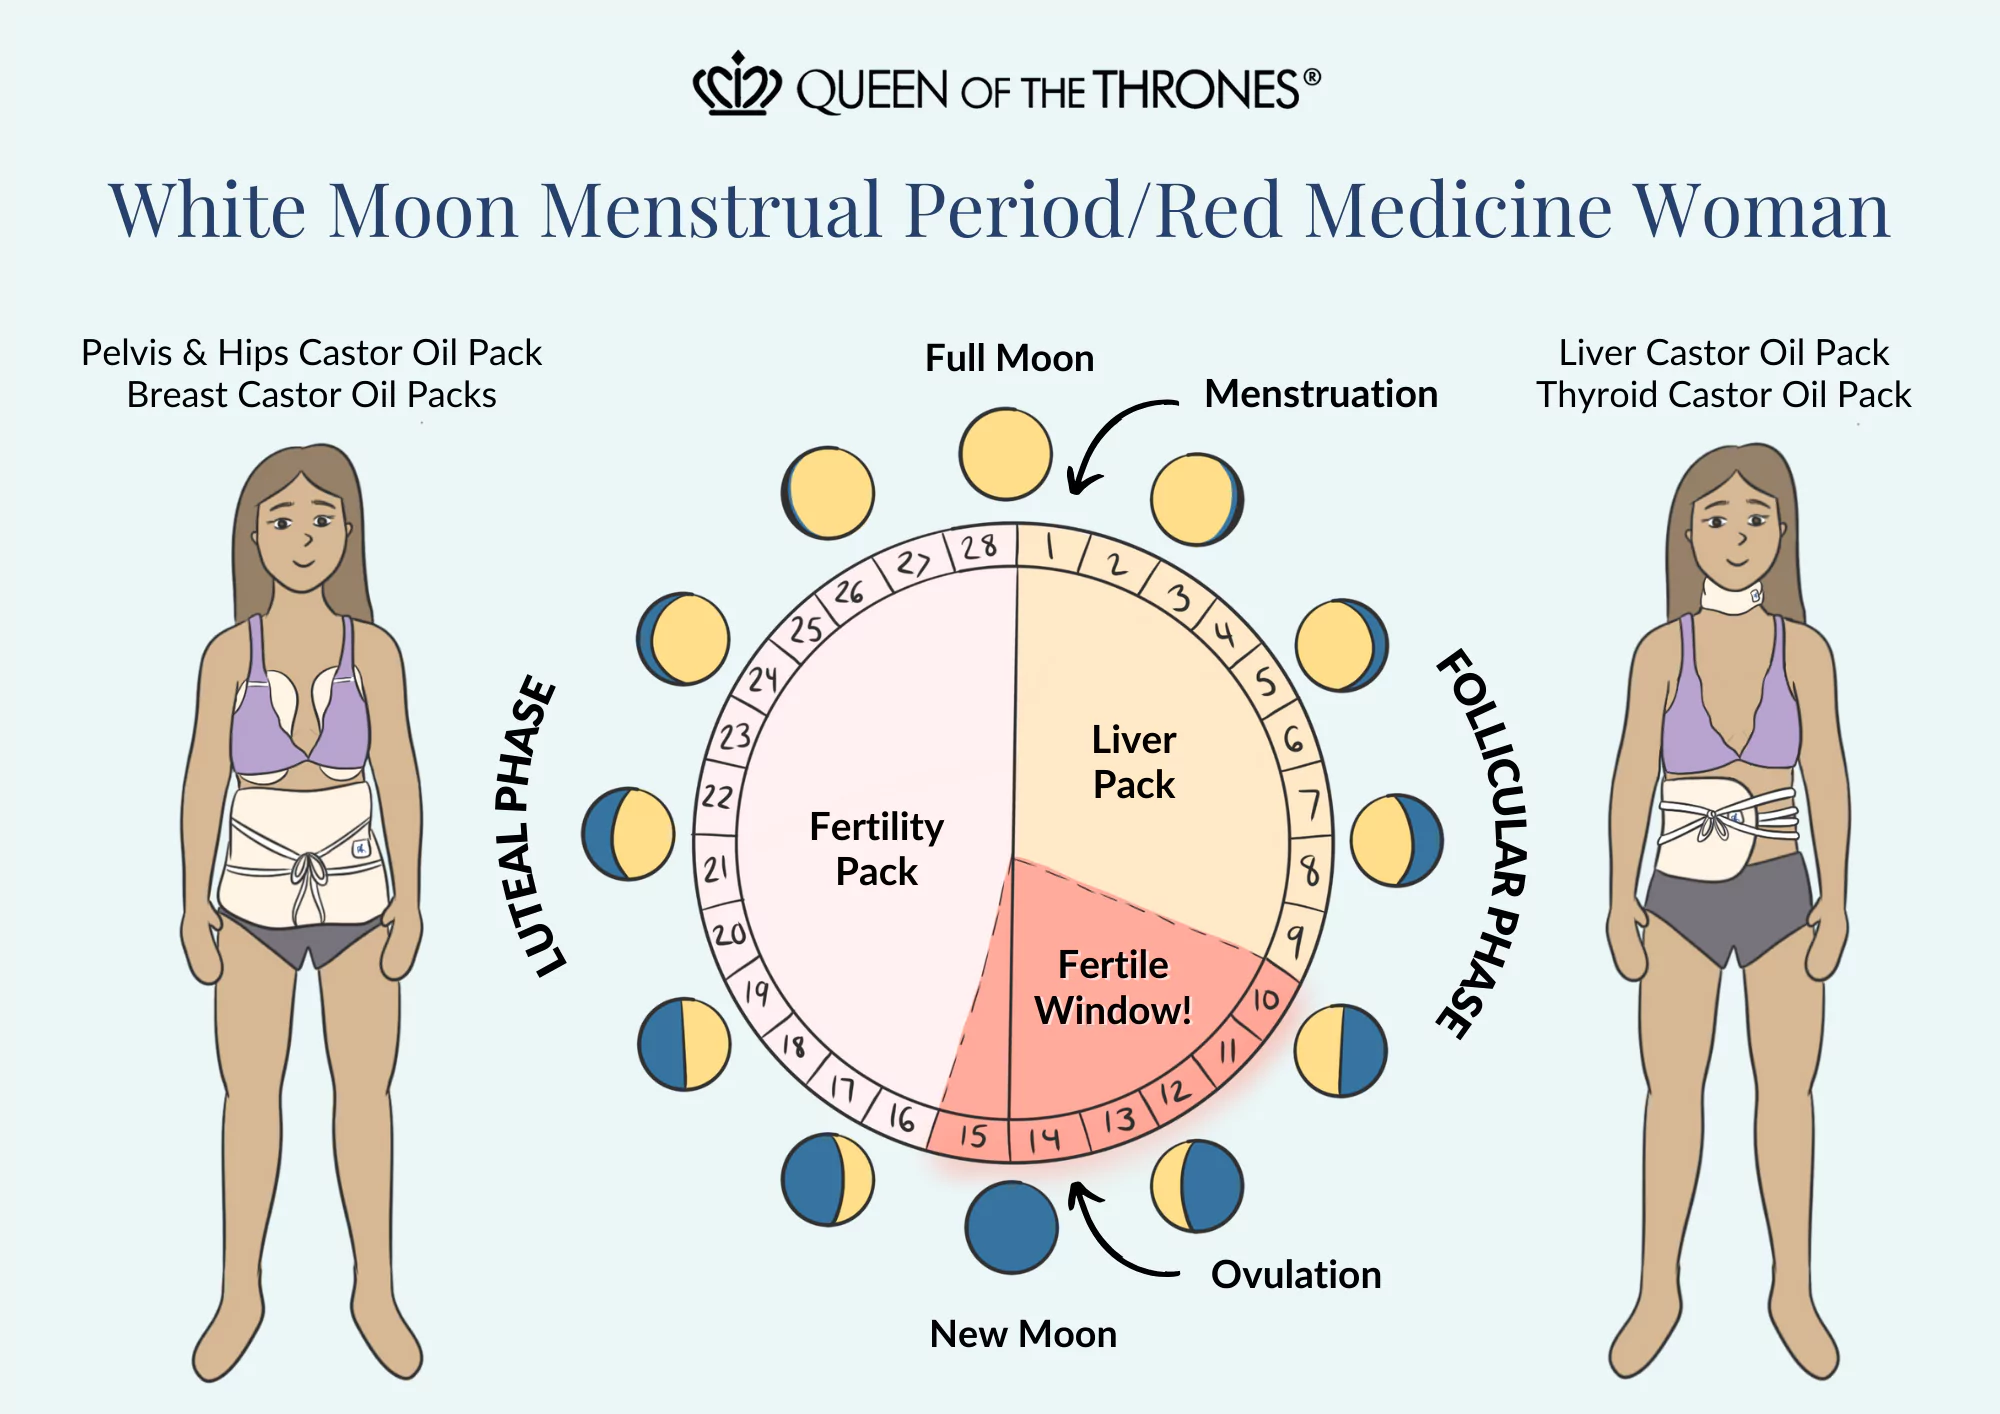 Queen of the Thrones white moon red medicine menstruation